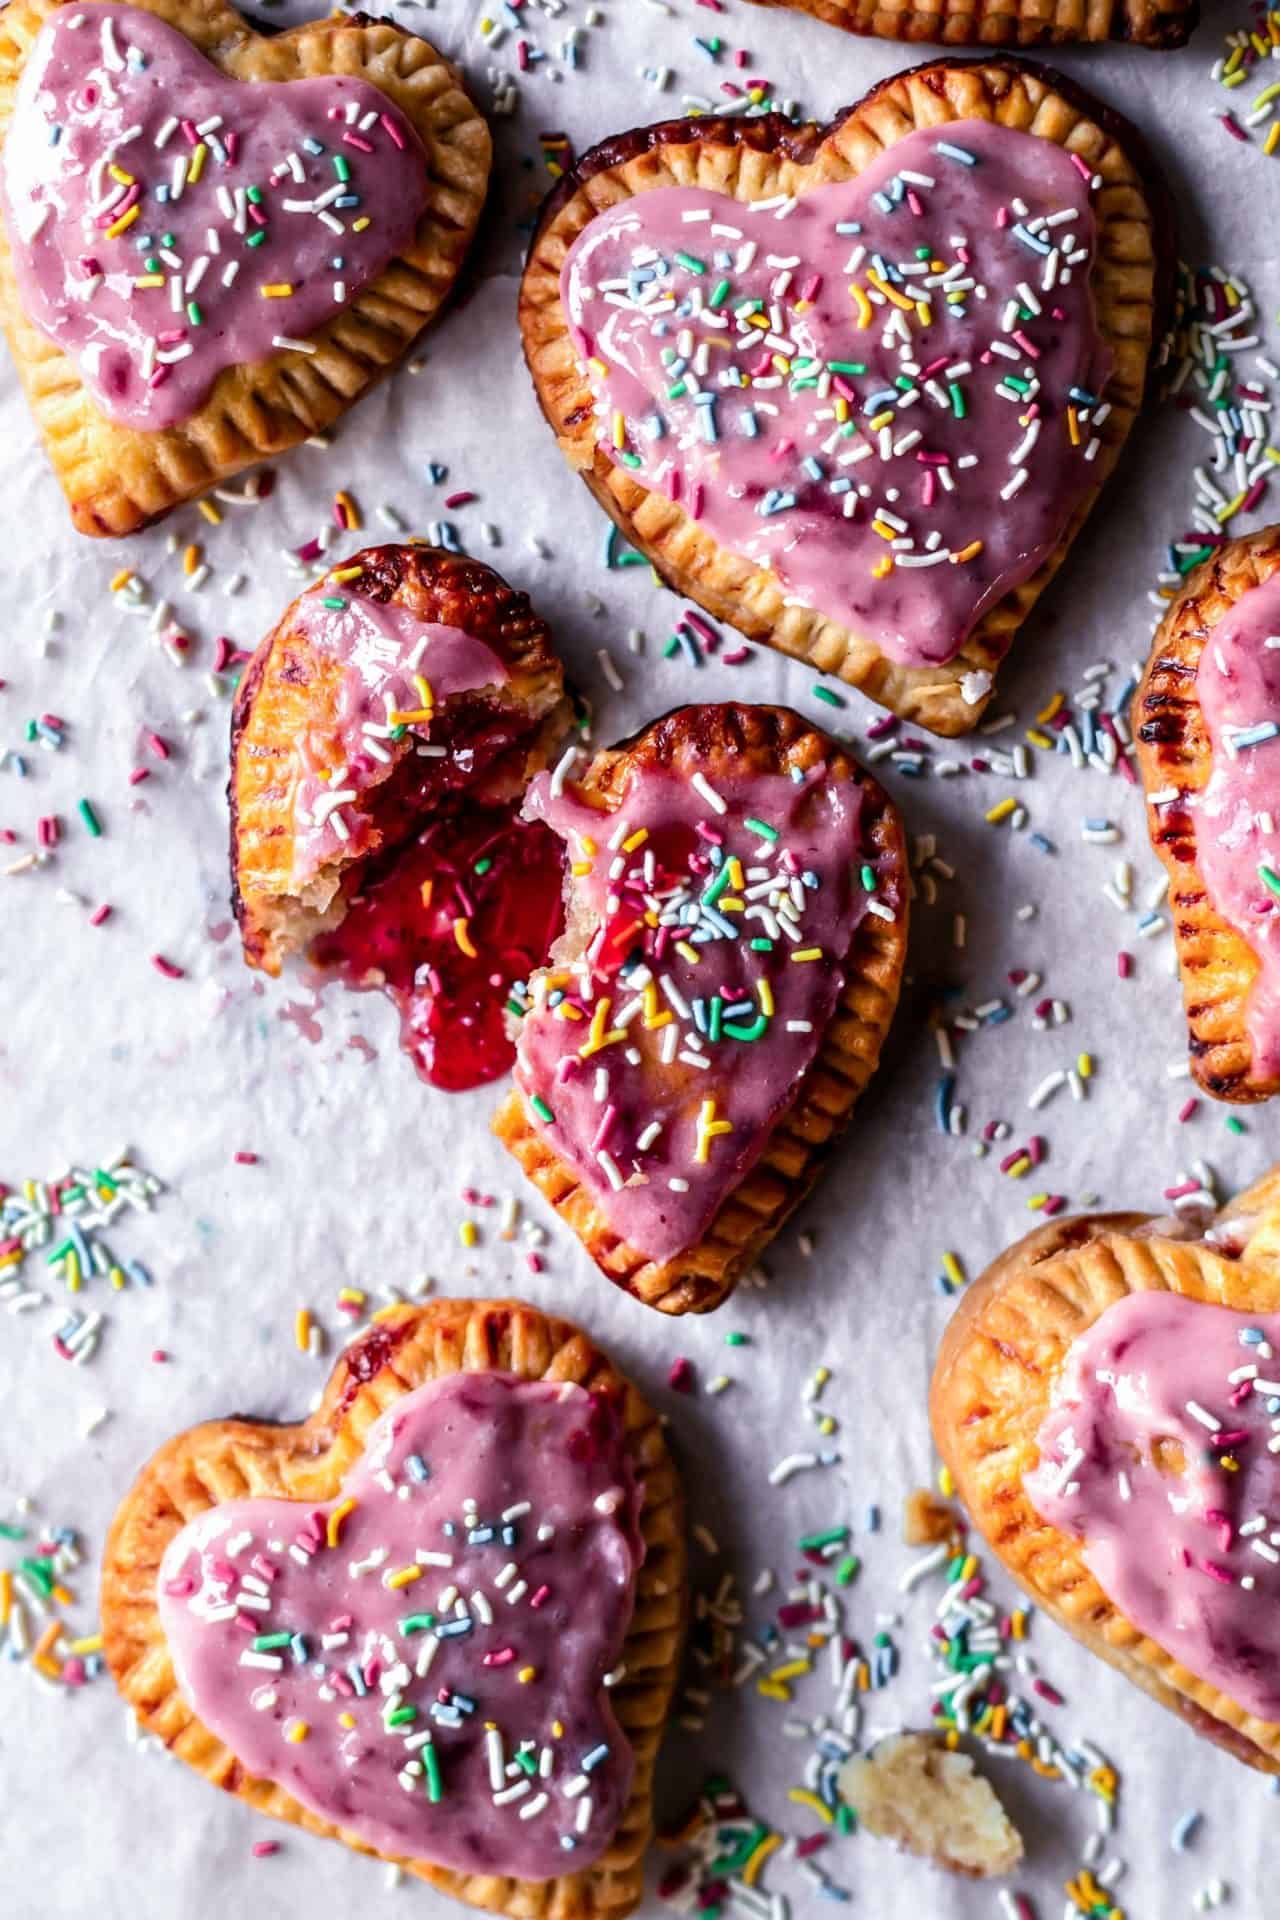 These Gluten-Free Pop-Tarts are flaky, buttery, and filled with the most delicious combo of cream cheese and strawberry jam.